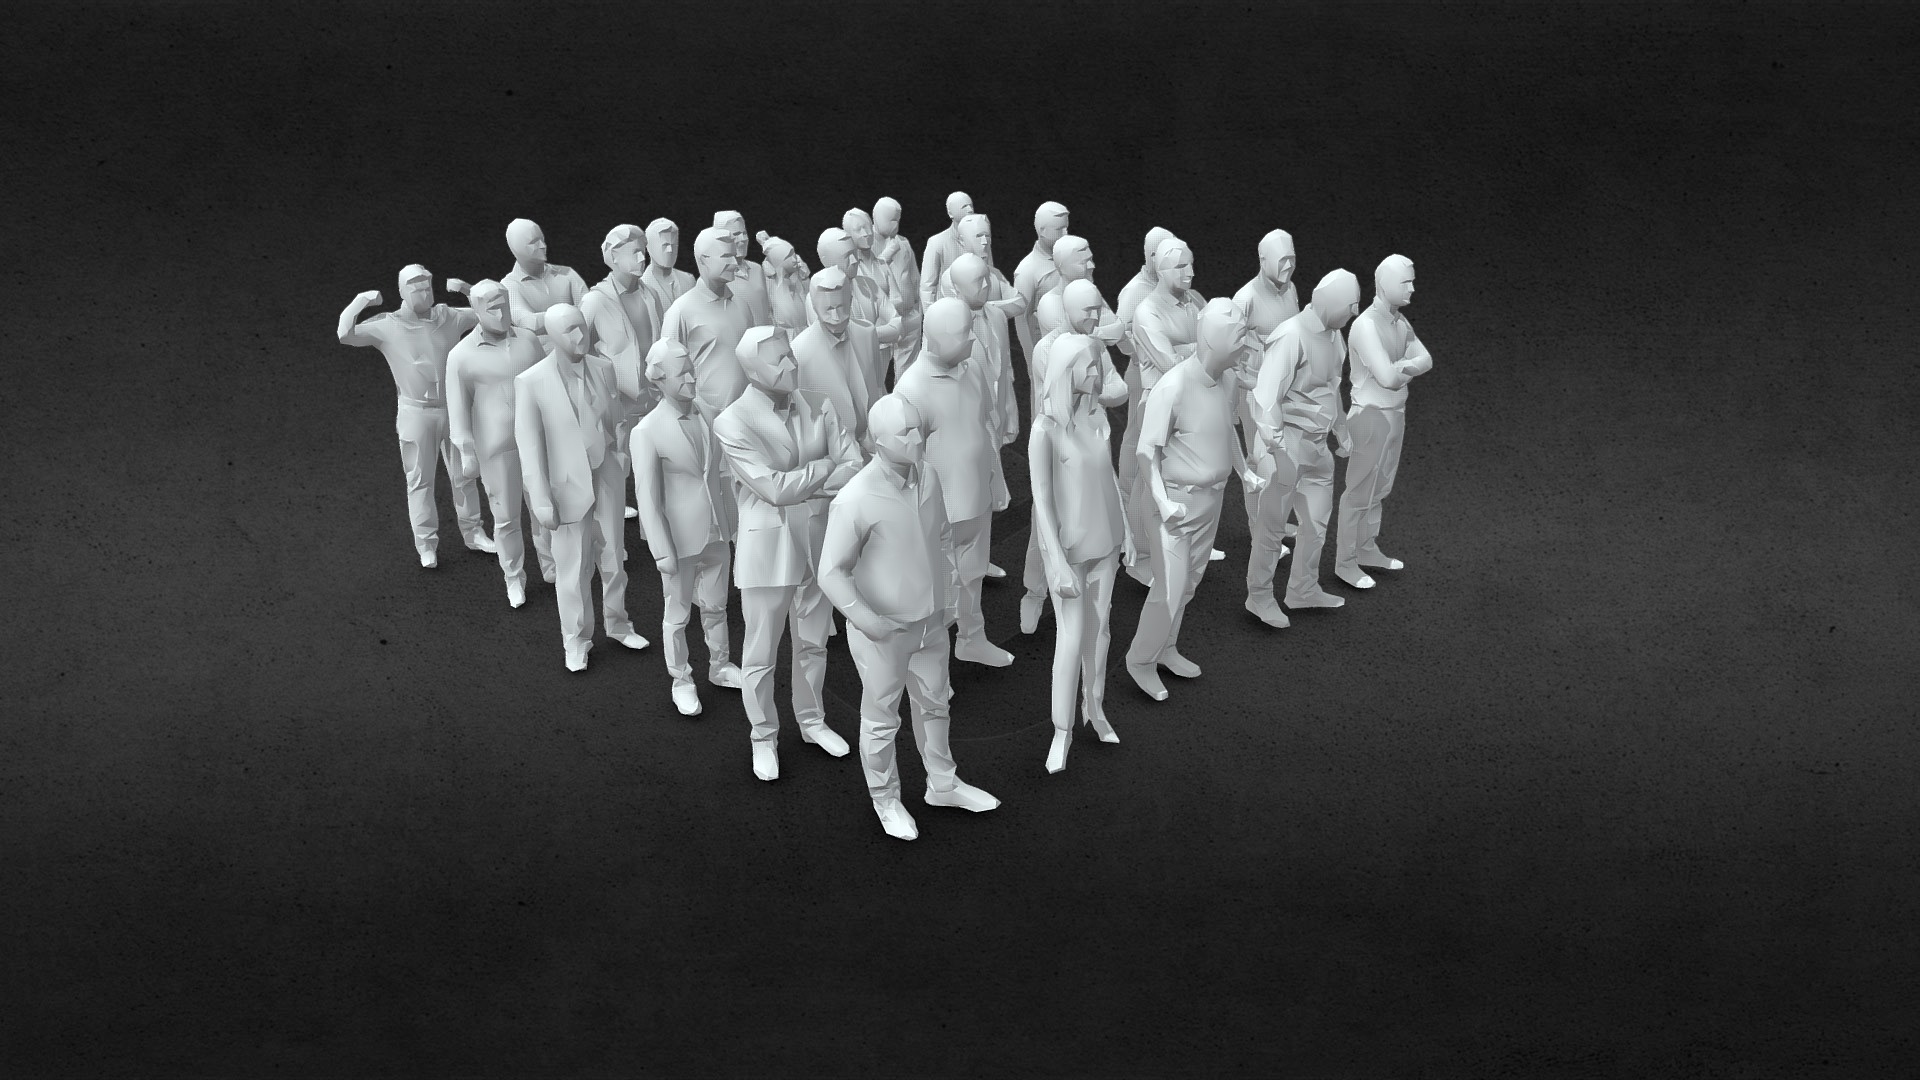 3D model 30 Low Poly people collection - This is a 3D model of the 30 Low Poly people collection. The 3D model is about a group of people in white.